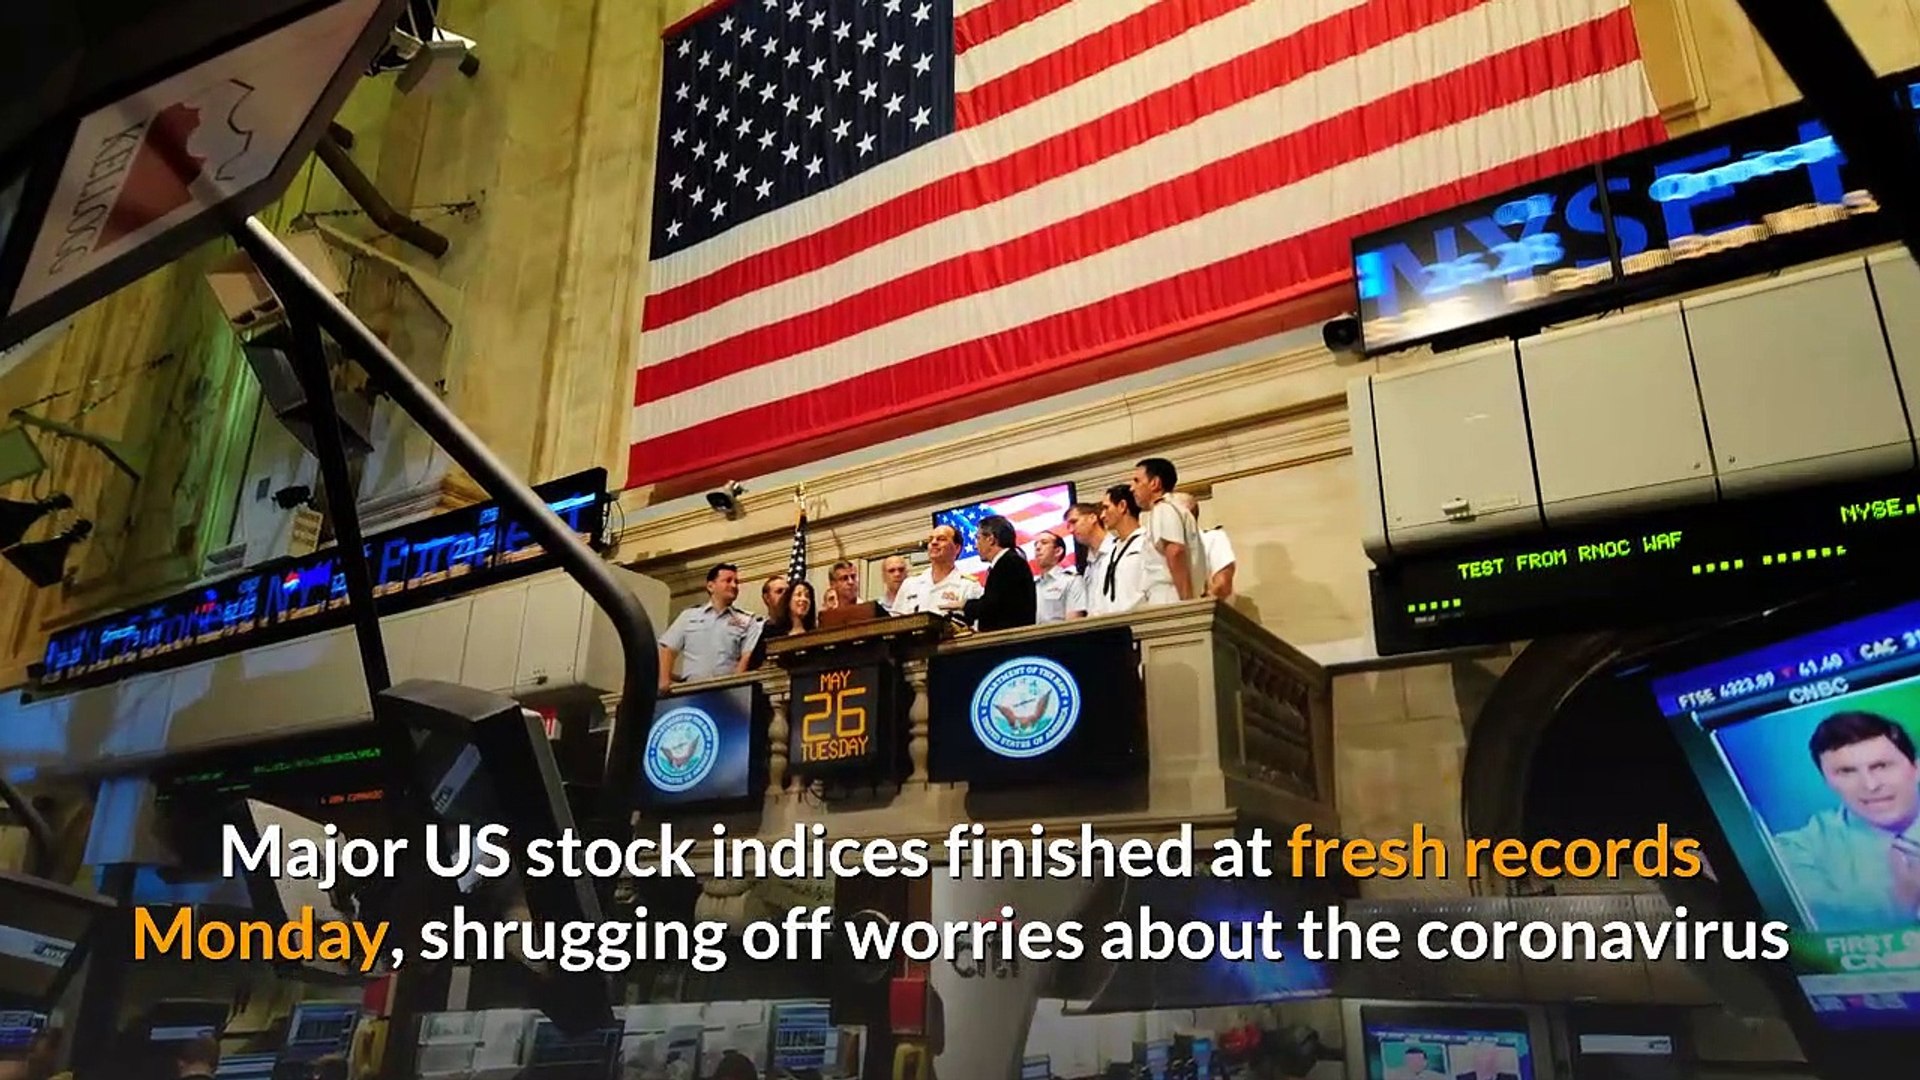 Coronavirus fears continue to pressure global stock exchanges